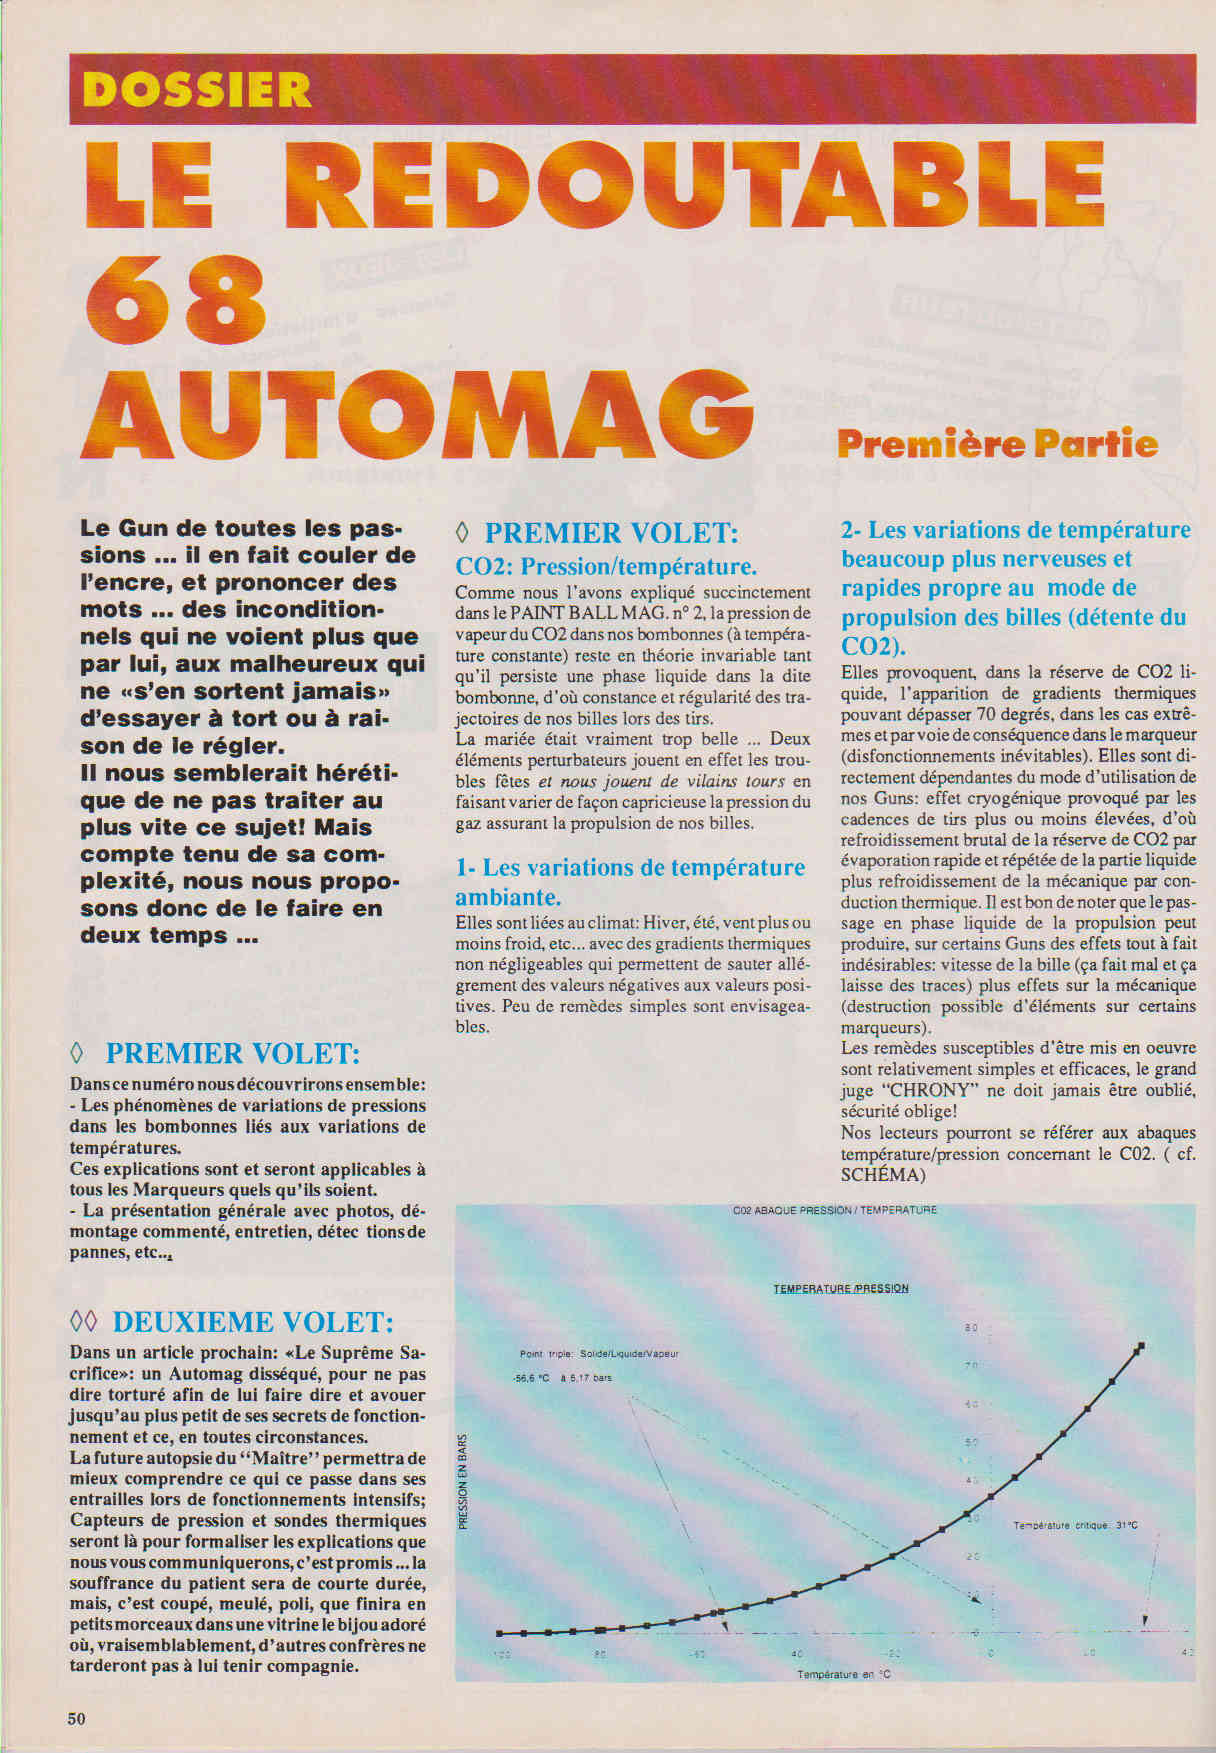 Automag 68 Page4910